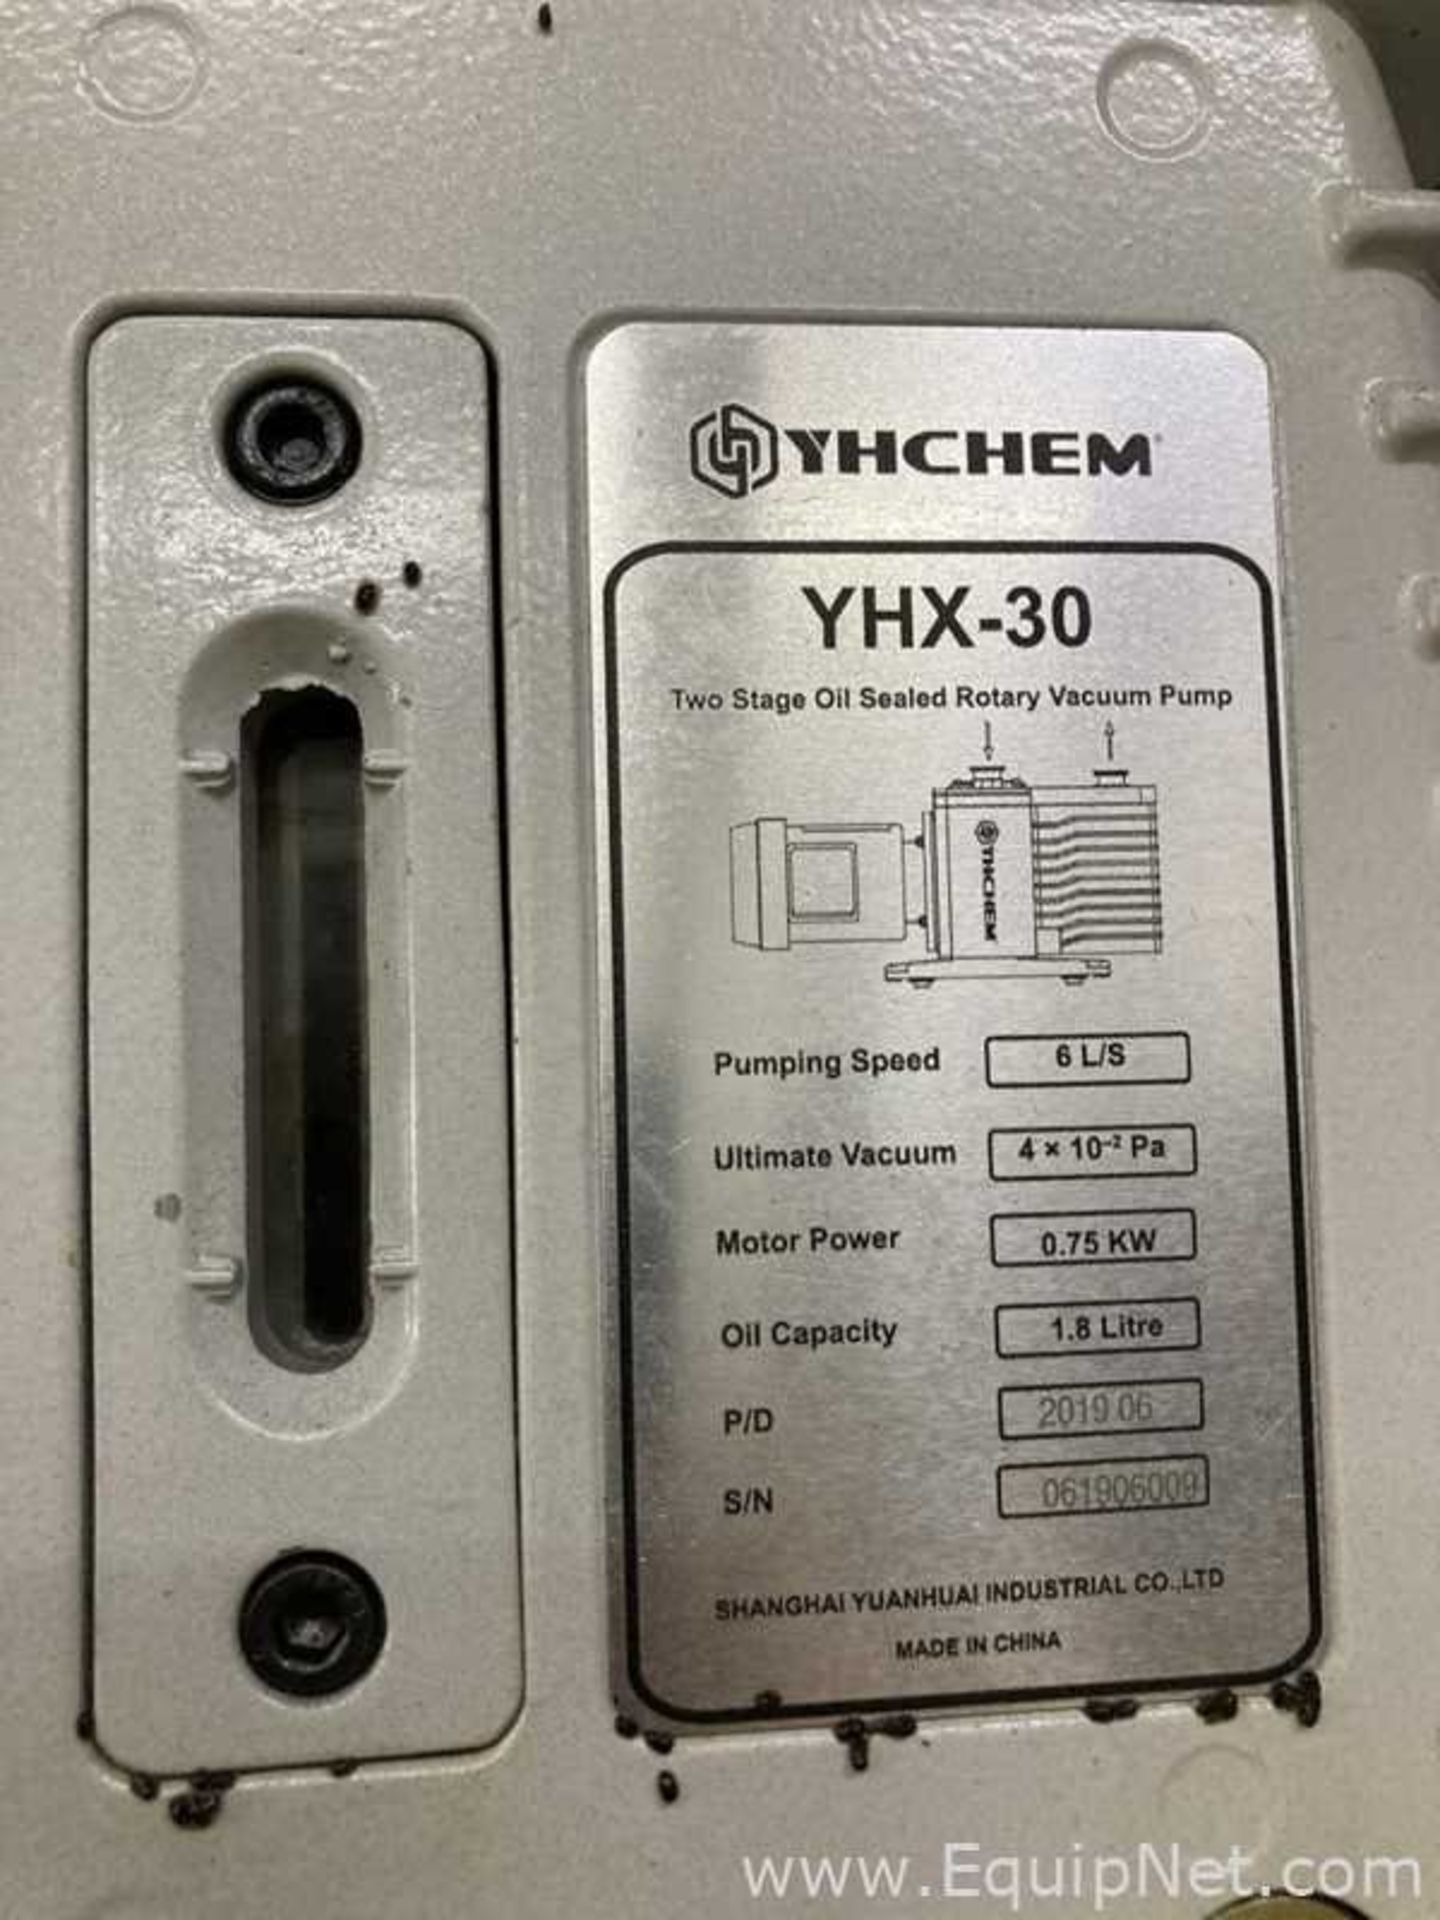 Shanghai Yuanhuai Industrial Co., LTD Yhchem YHX-30 Two Stage Vacuum Pump - Image 5 of 7